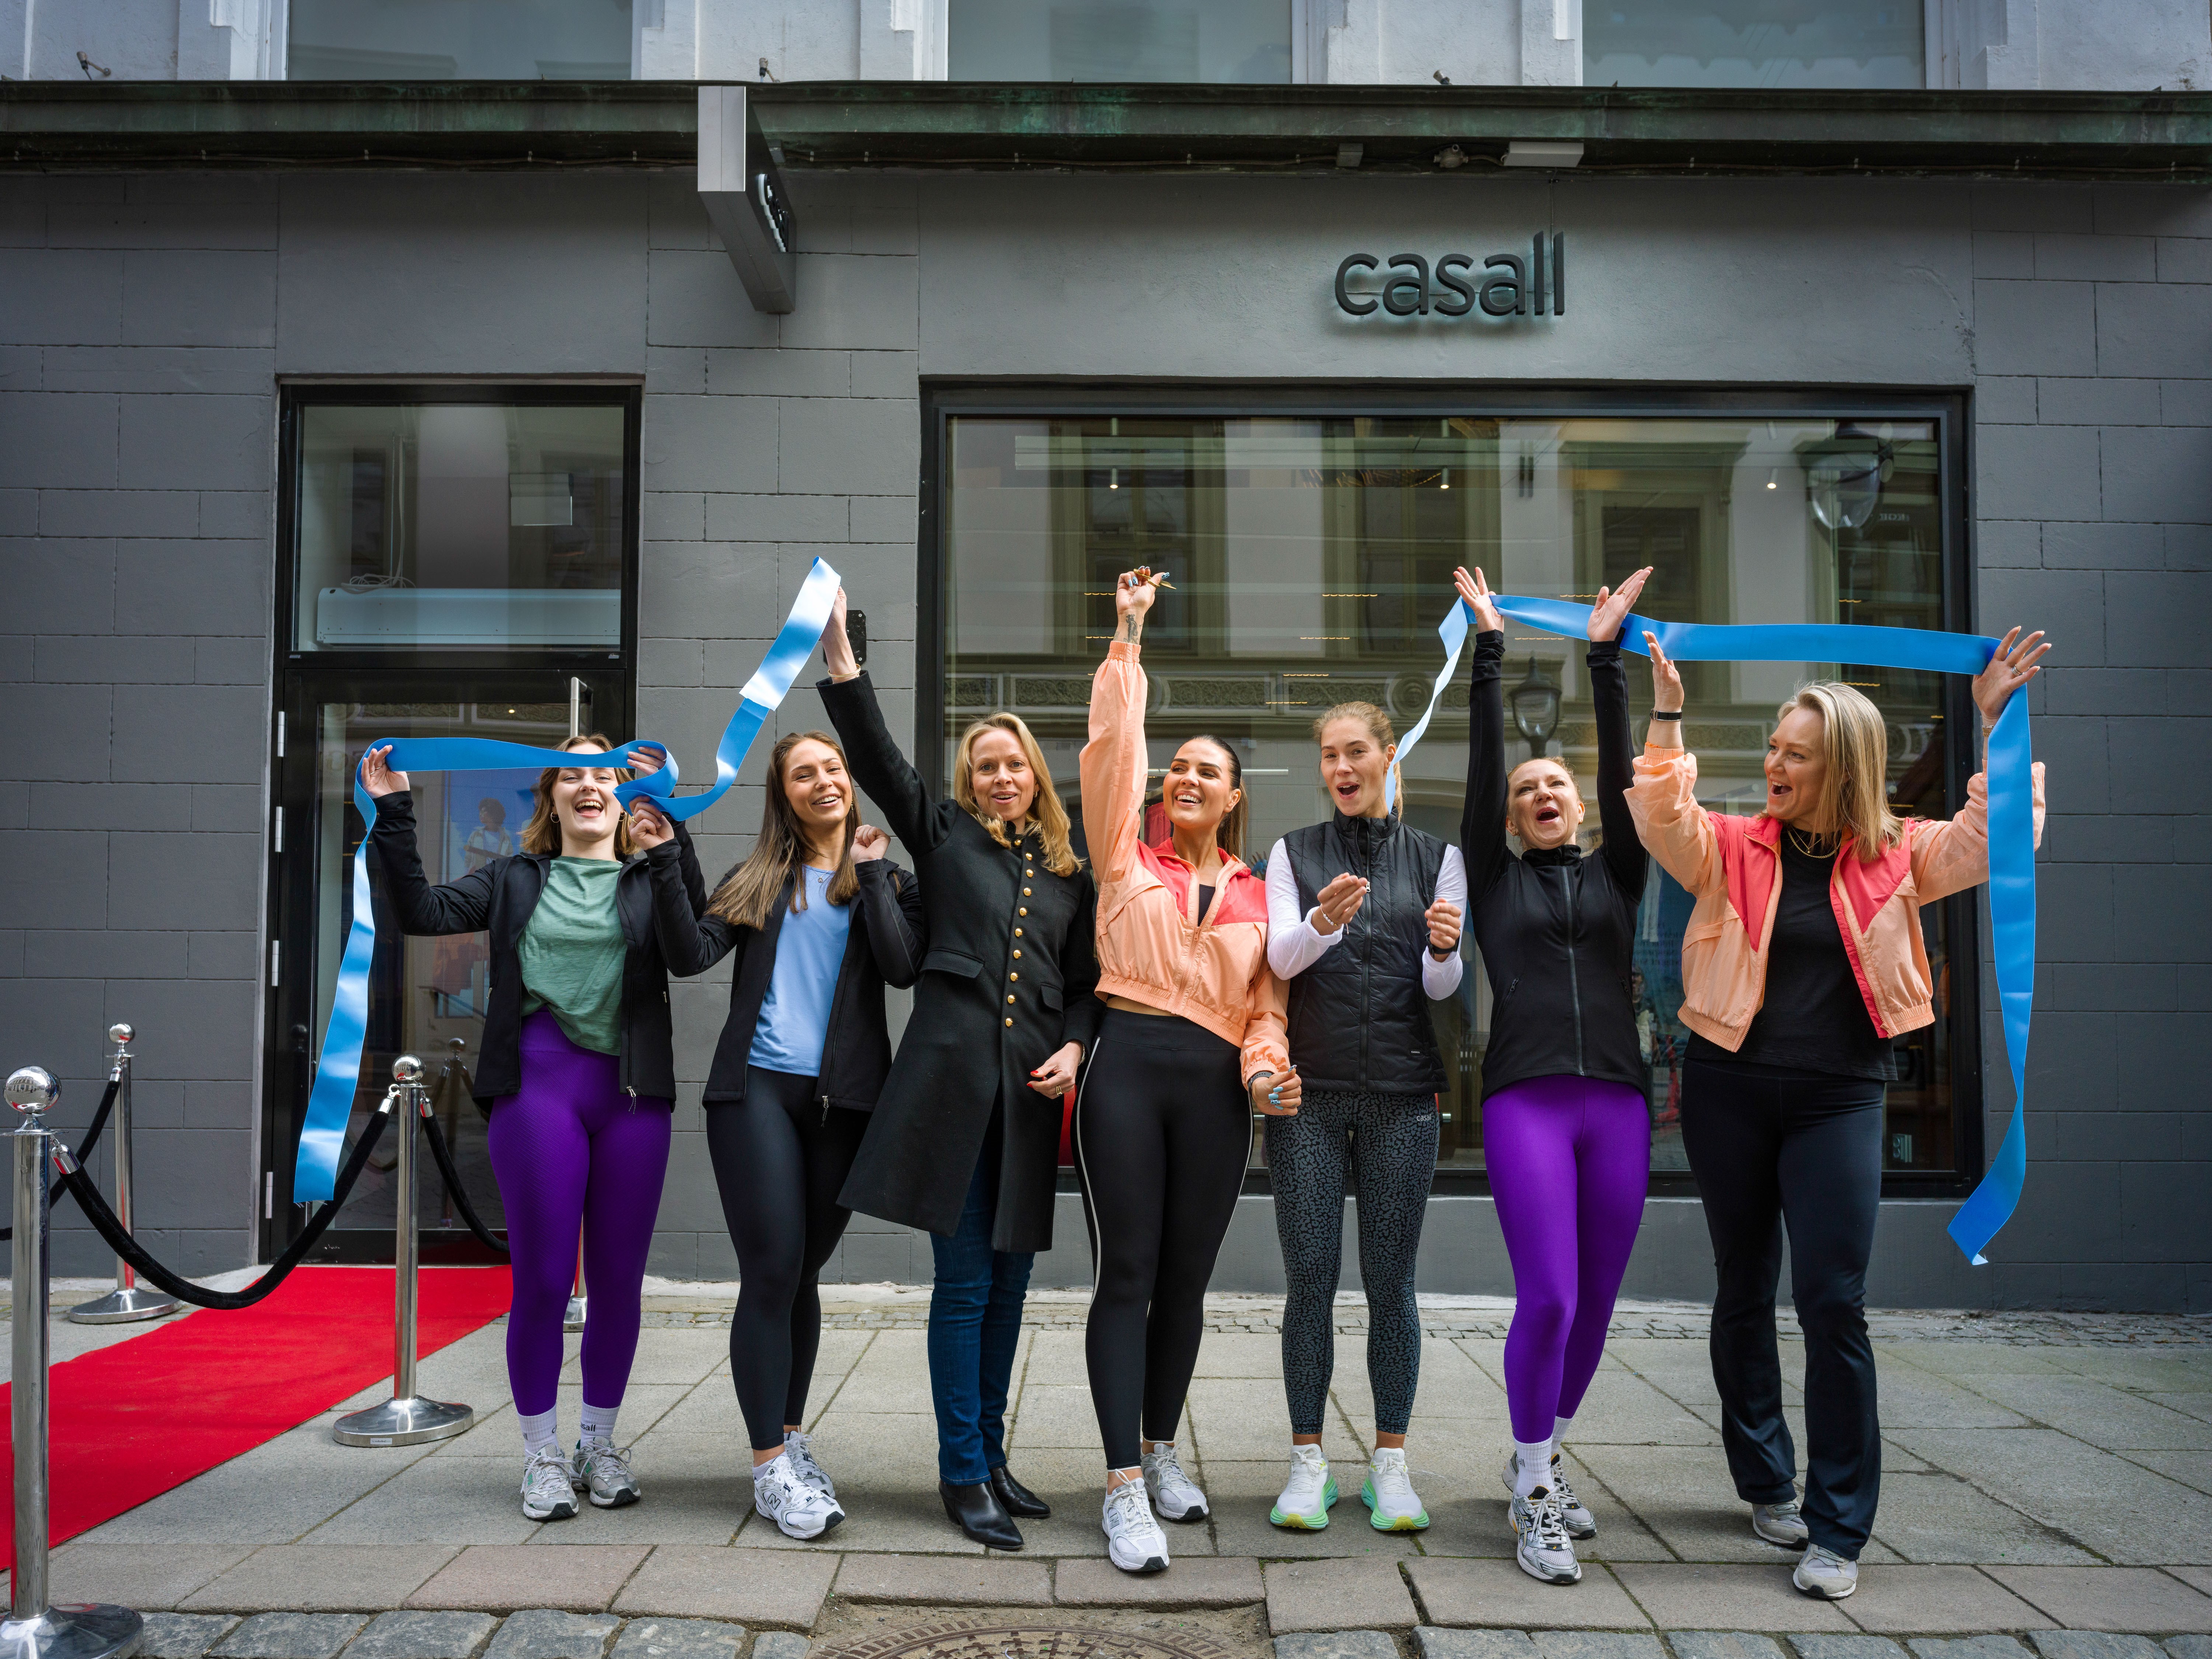 New store opening: Casall